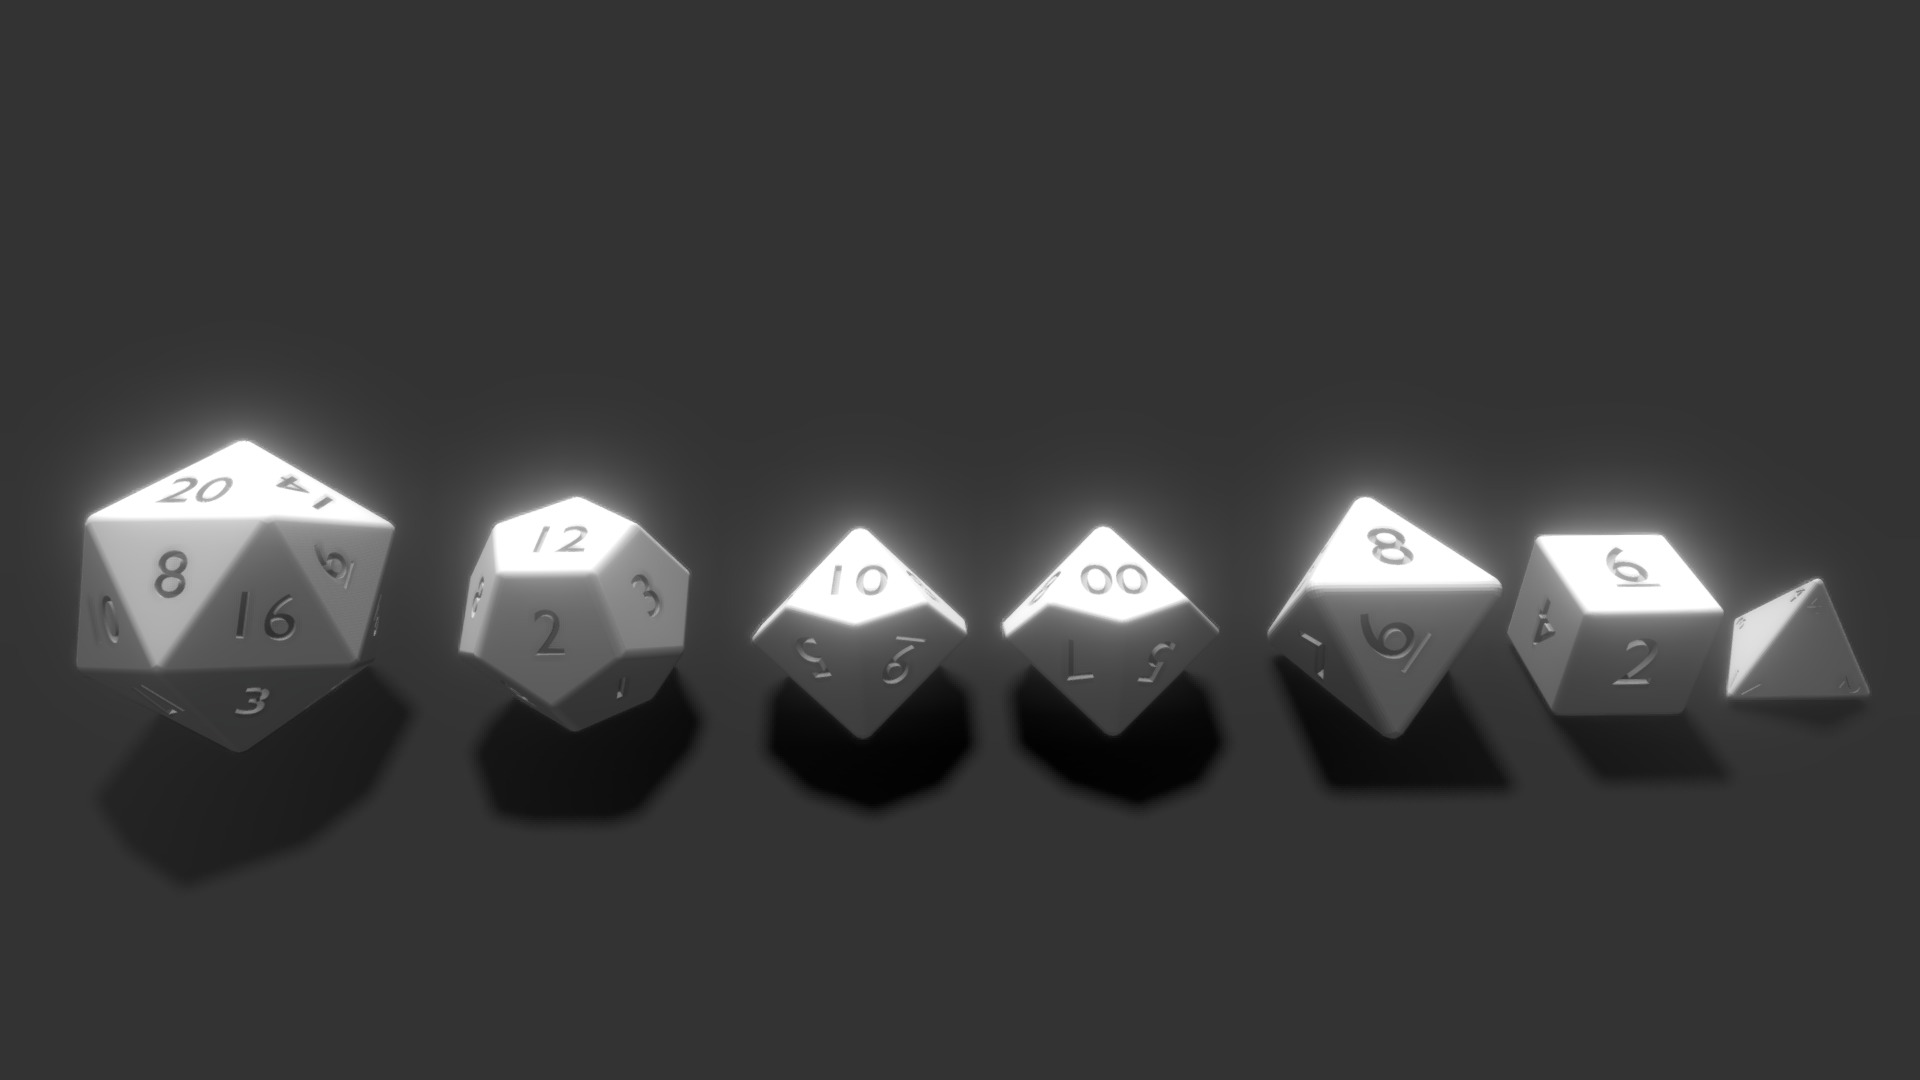 3D model Simple dice set (d4, d6, d8, d10, d00, d12, d20) - This is a 3D model of the Simple dice set (d4, d6, d8, d10, d00, d12, d20). The 3D model is about a group of white and black dominoes.